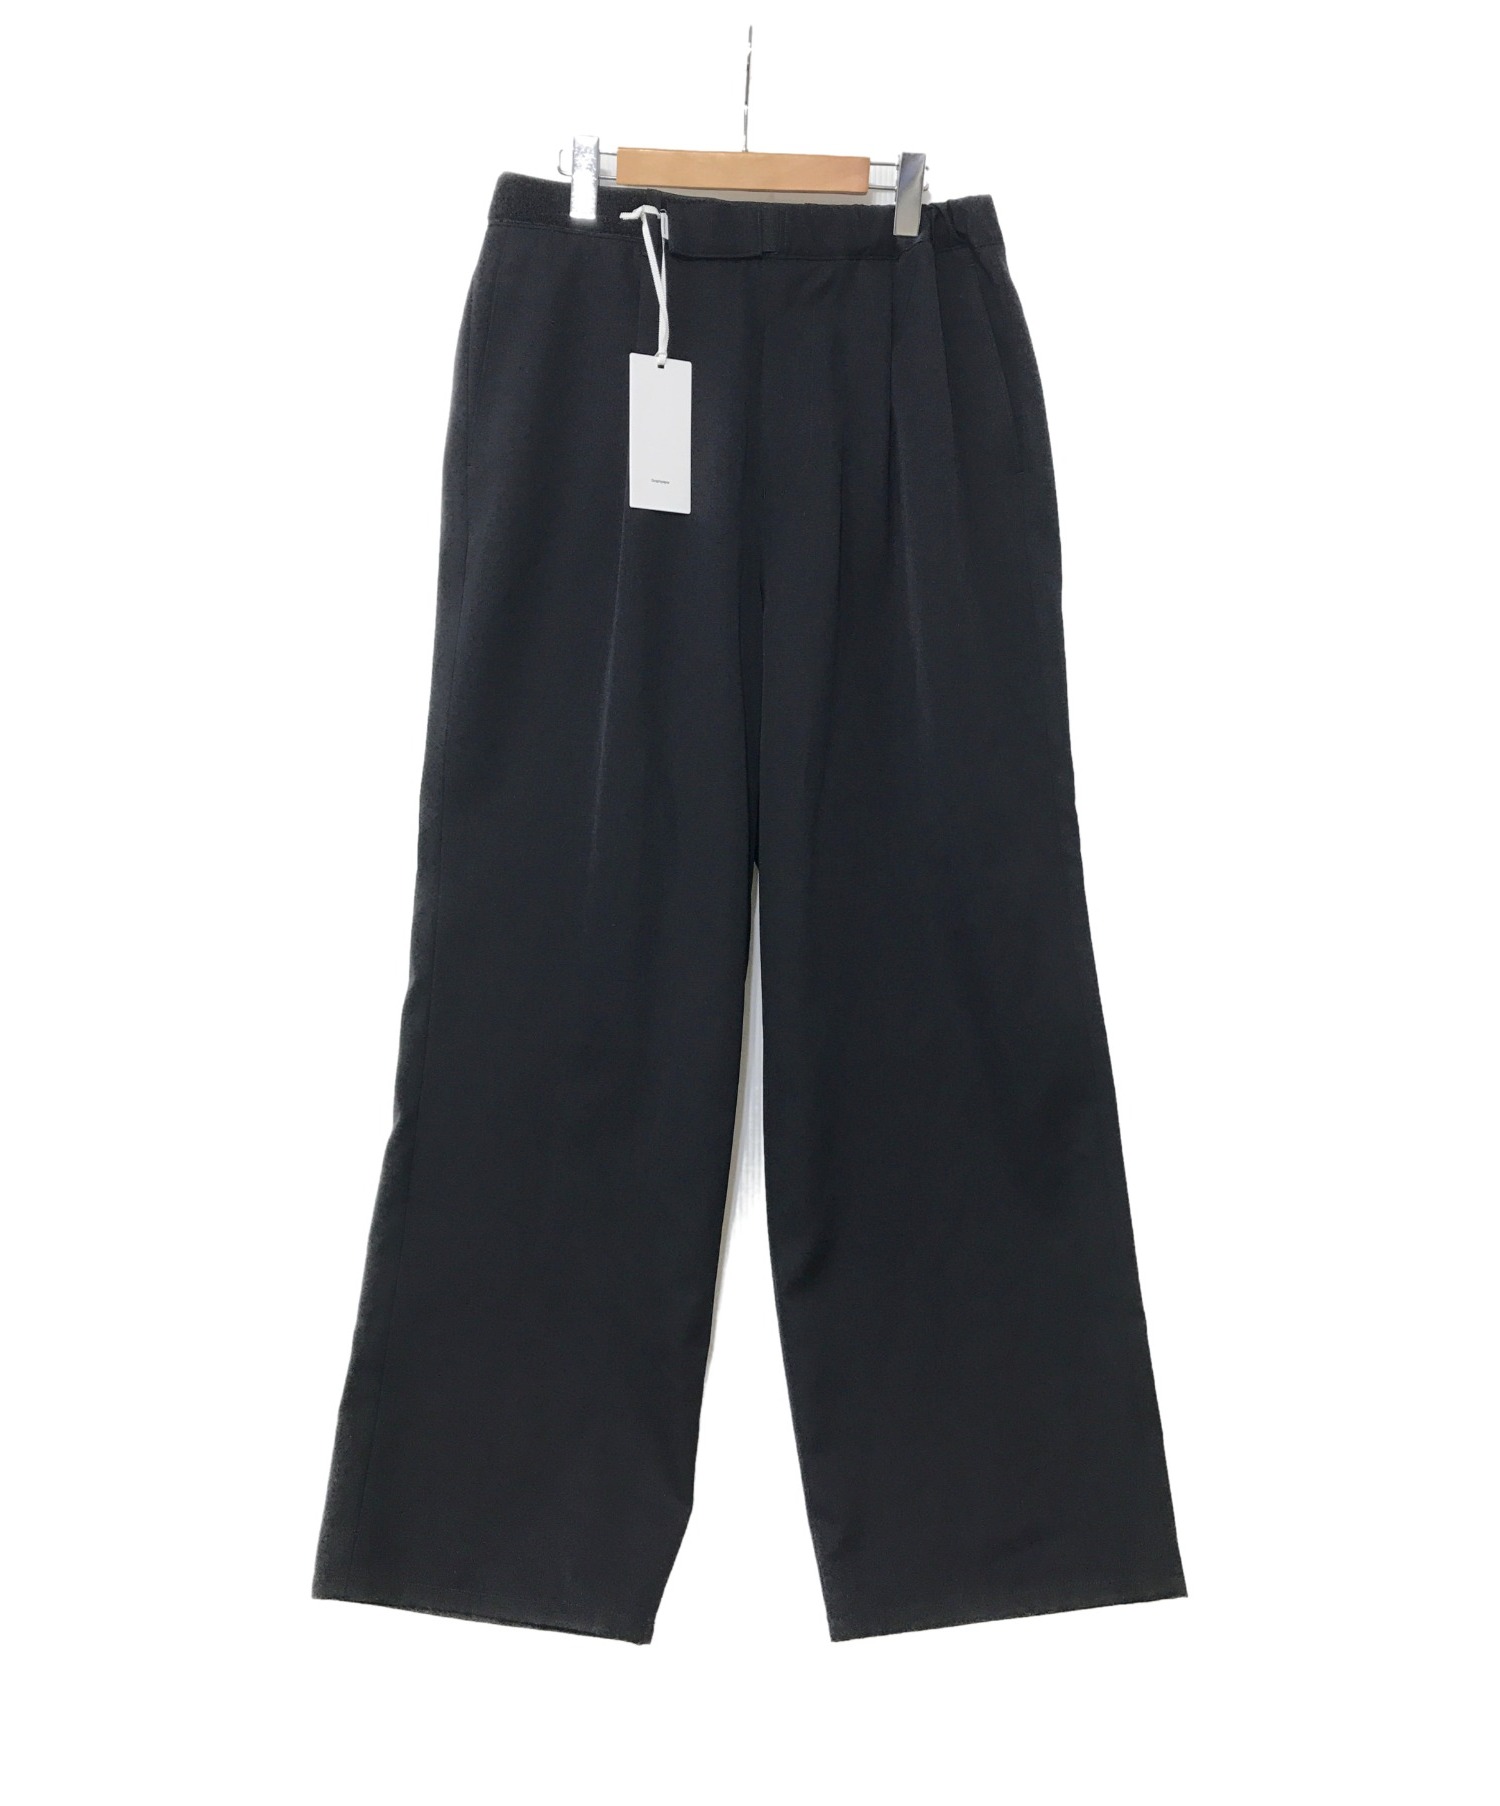 Graphpaper Selvage Wool Wide Chef Pants www.quintcoach.com.br